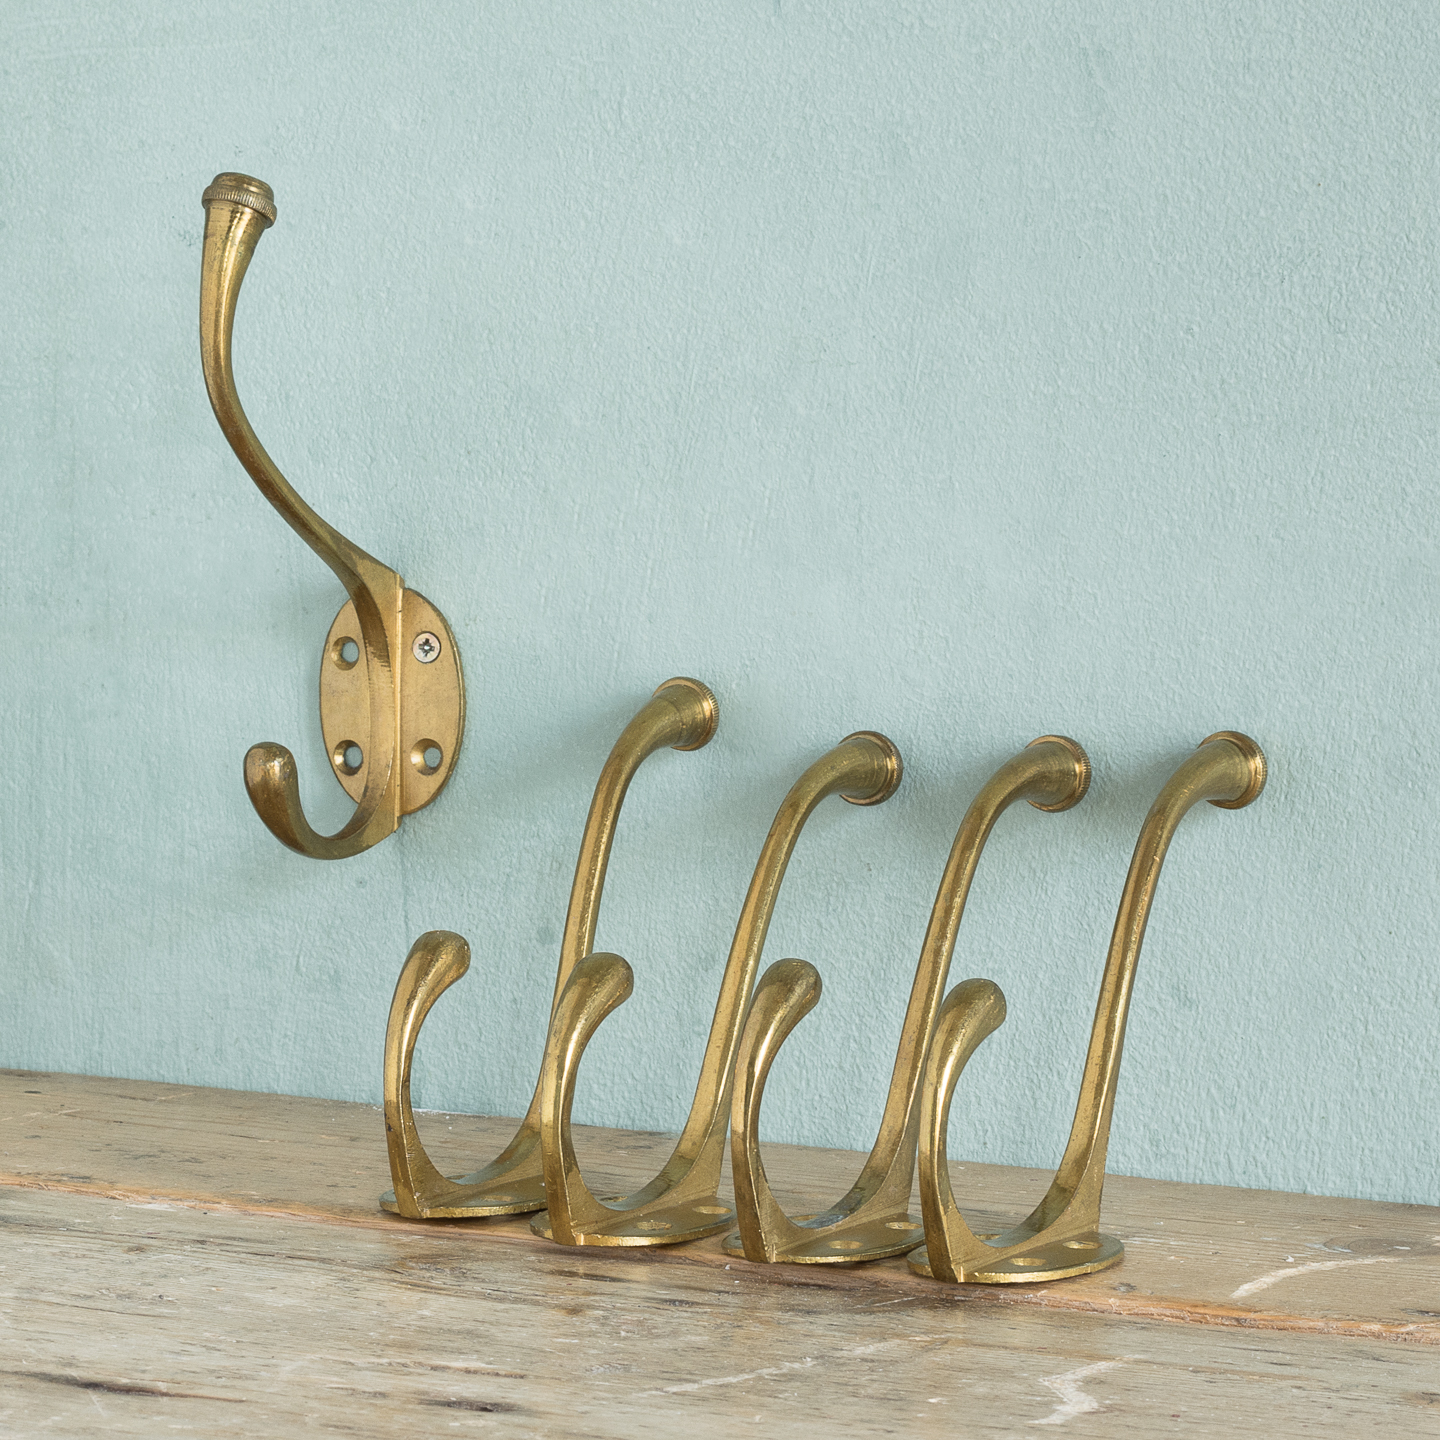 Lacquered brass coat hooks - LASSCO - England's prime resource for  Architectural Antiques, Salvage Curiosities